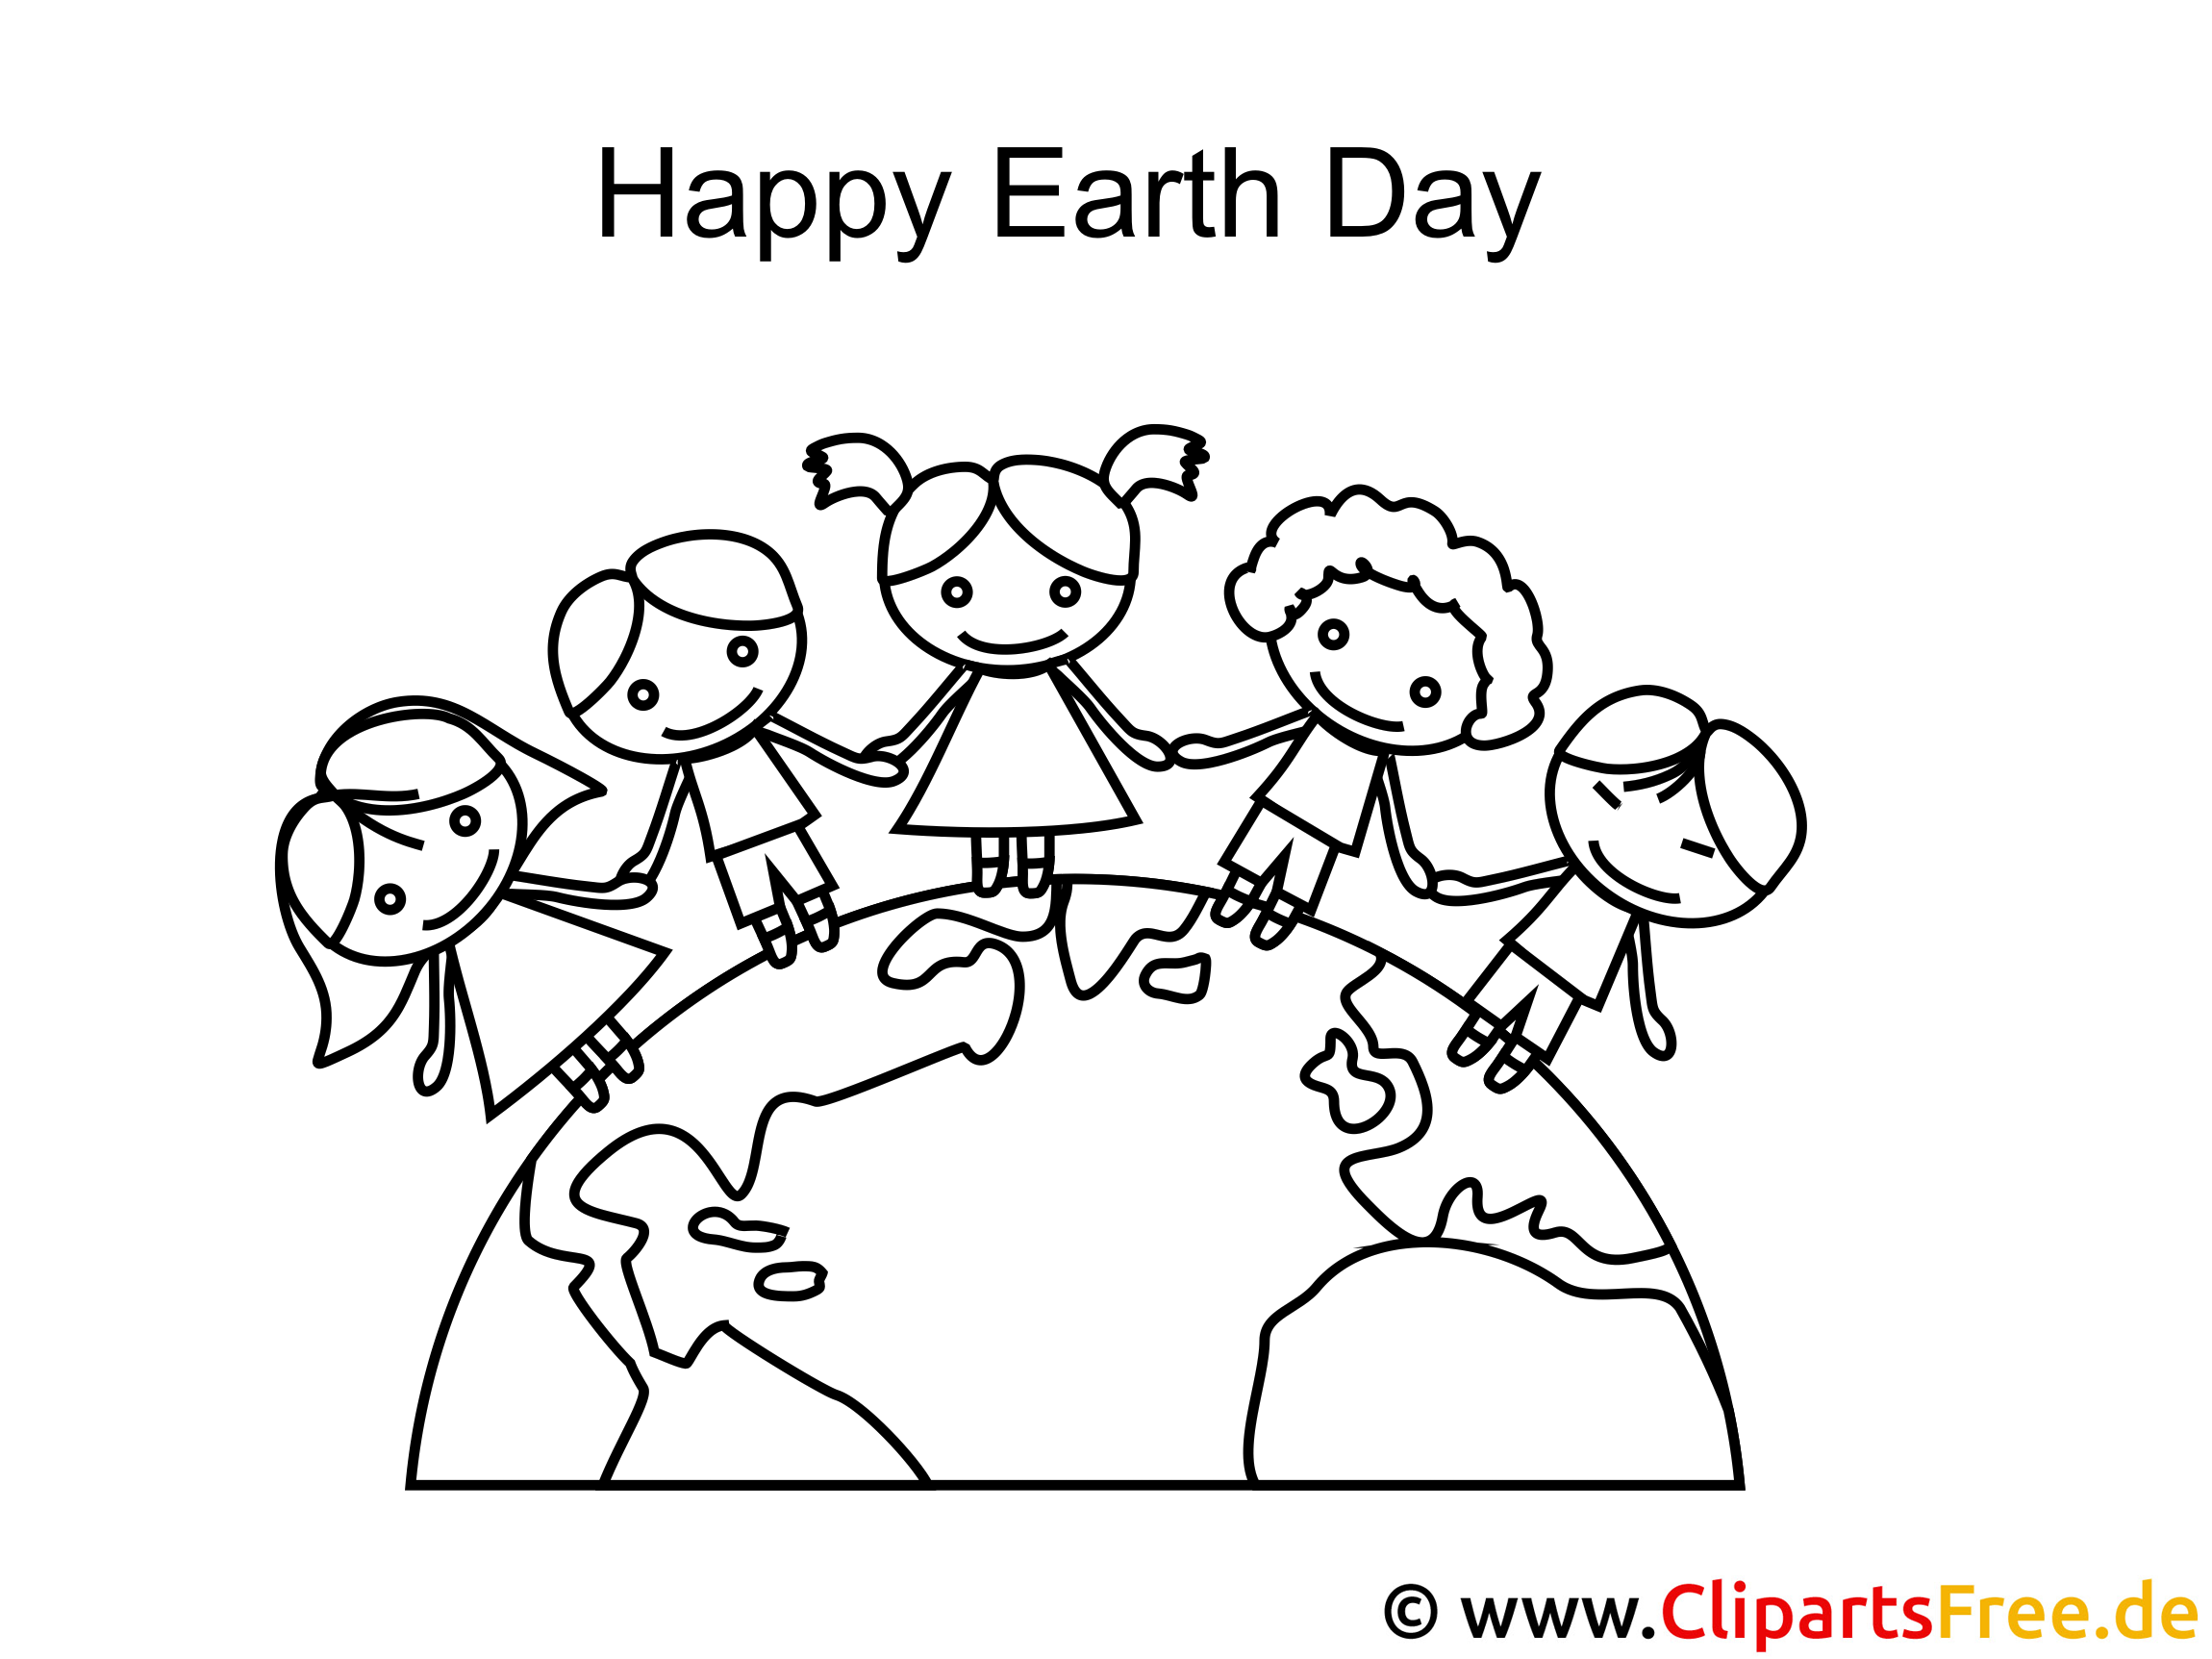 Download Happy Earth Day Colouring Page